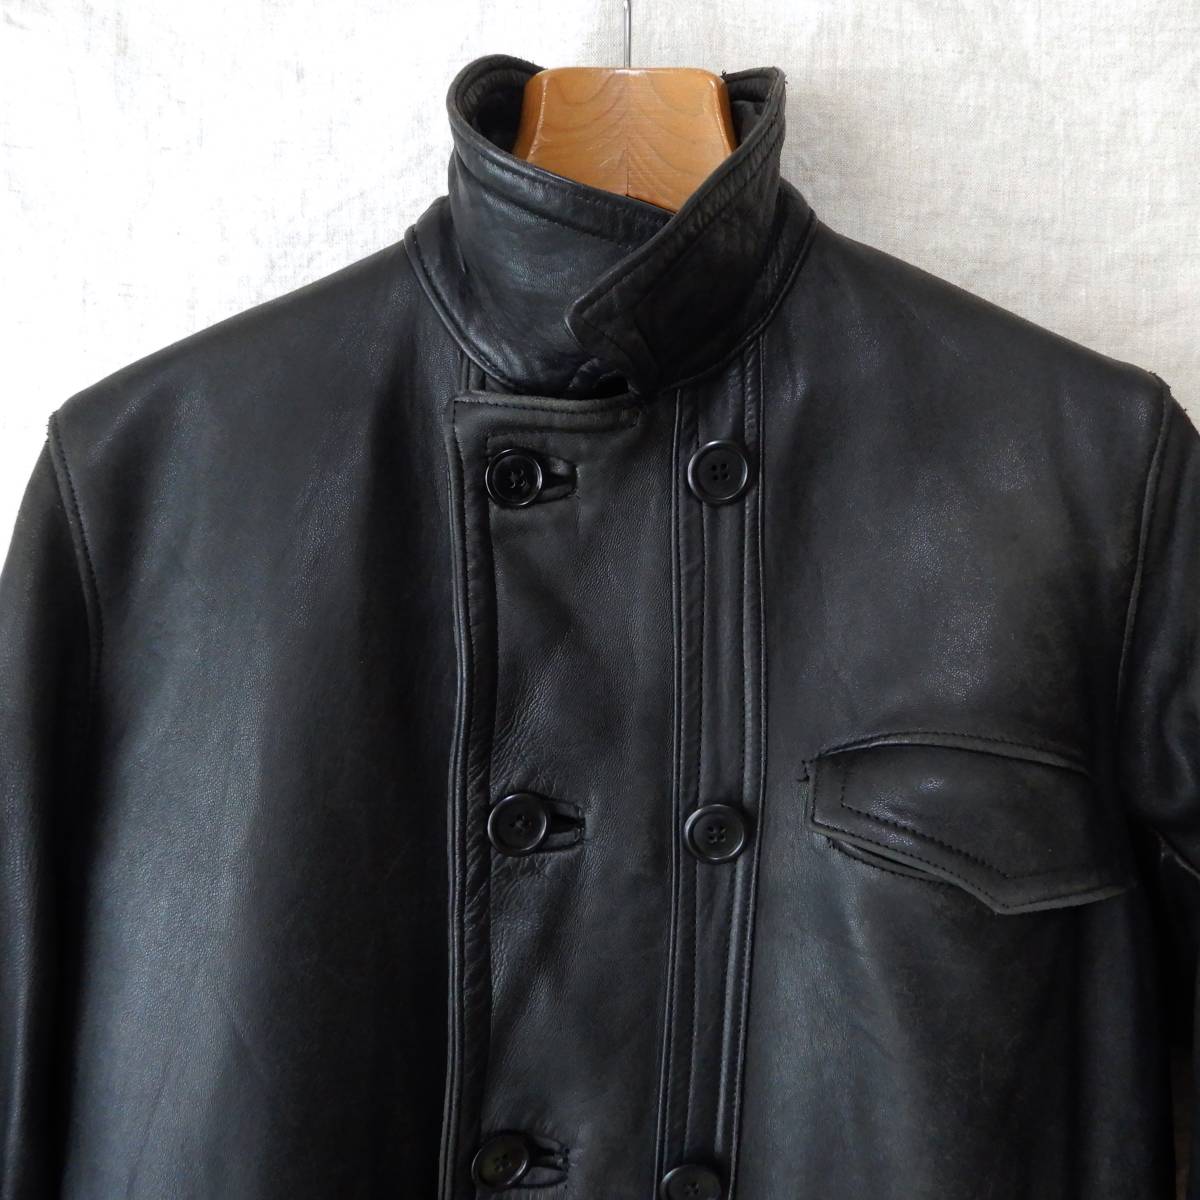 French Work Leather Jacket Black Le Corbusier Jacket Vintage フレンチワーク  レザージャケット ダブルブレスト コルビジェジャケット